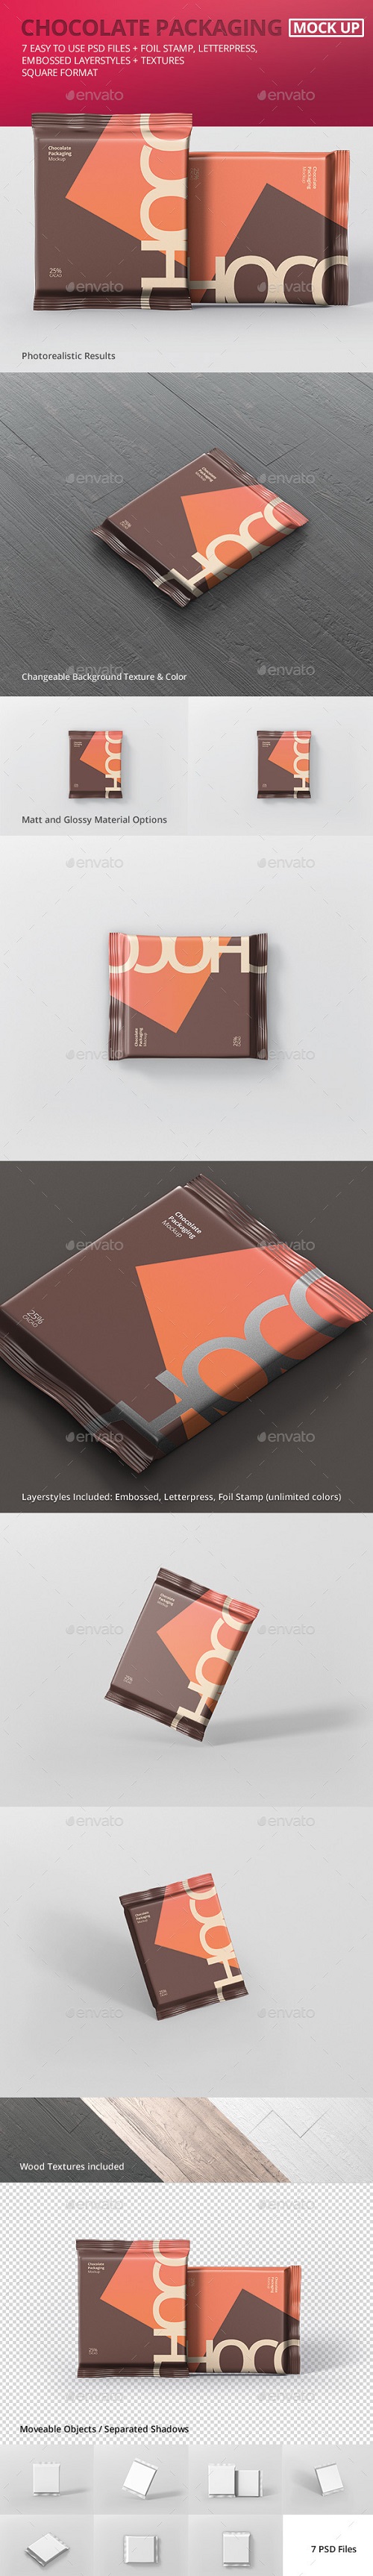 Foil Chocolate Packaging Mockup - Square Size - 21180593